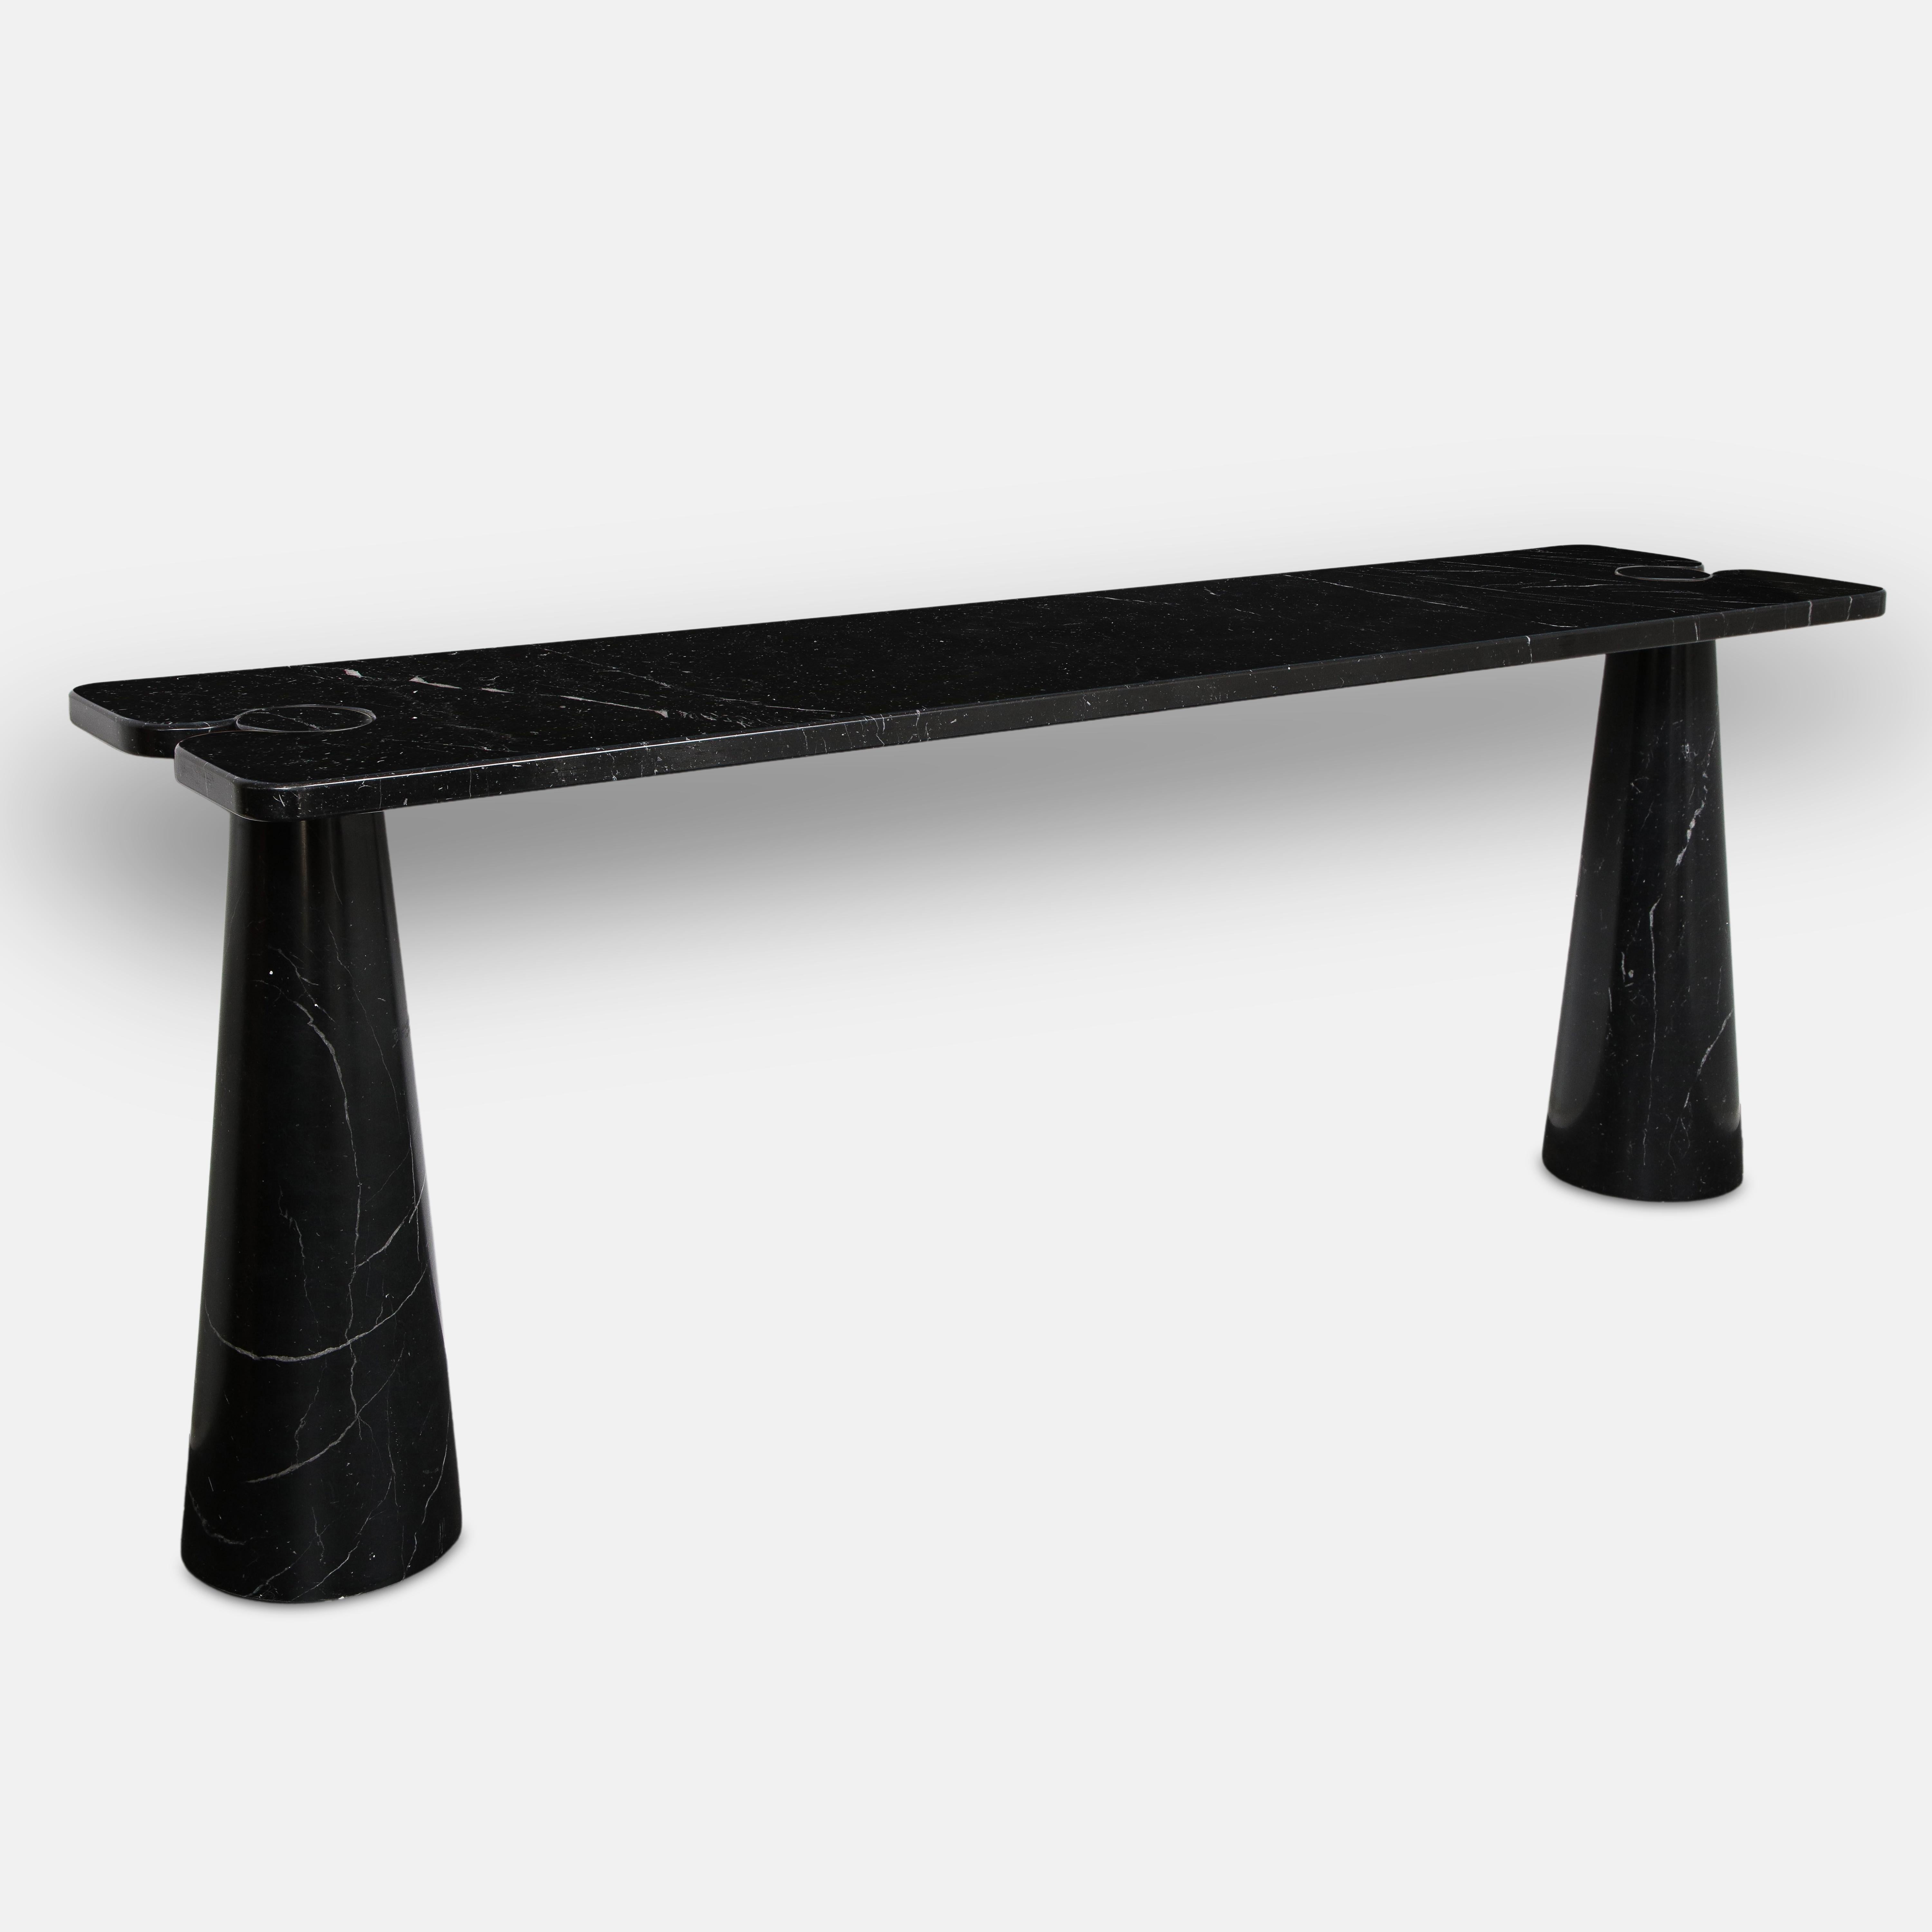 Designed by Angelo Mangiarotti for Skipper from the 'Eros' series, iconic black or Nero Marquina marble console table with top fitted on two conical bases, Italy, 1971. This elegant console table has beautiful subtle veining throughout the stark